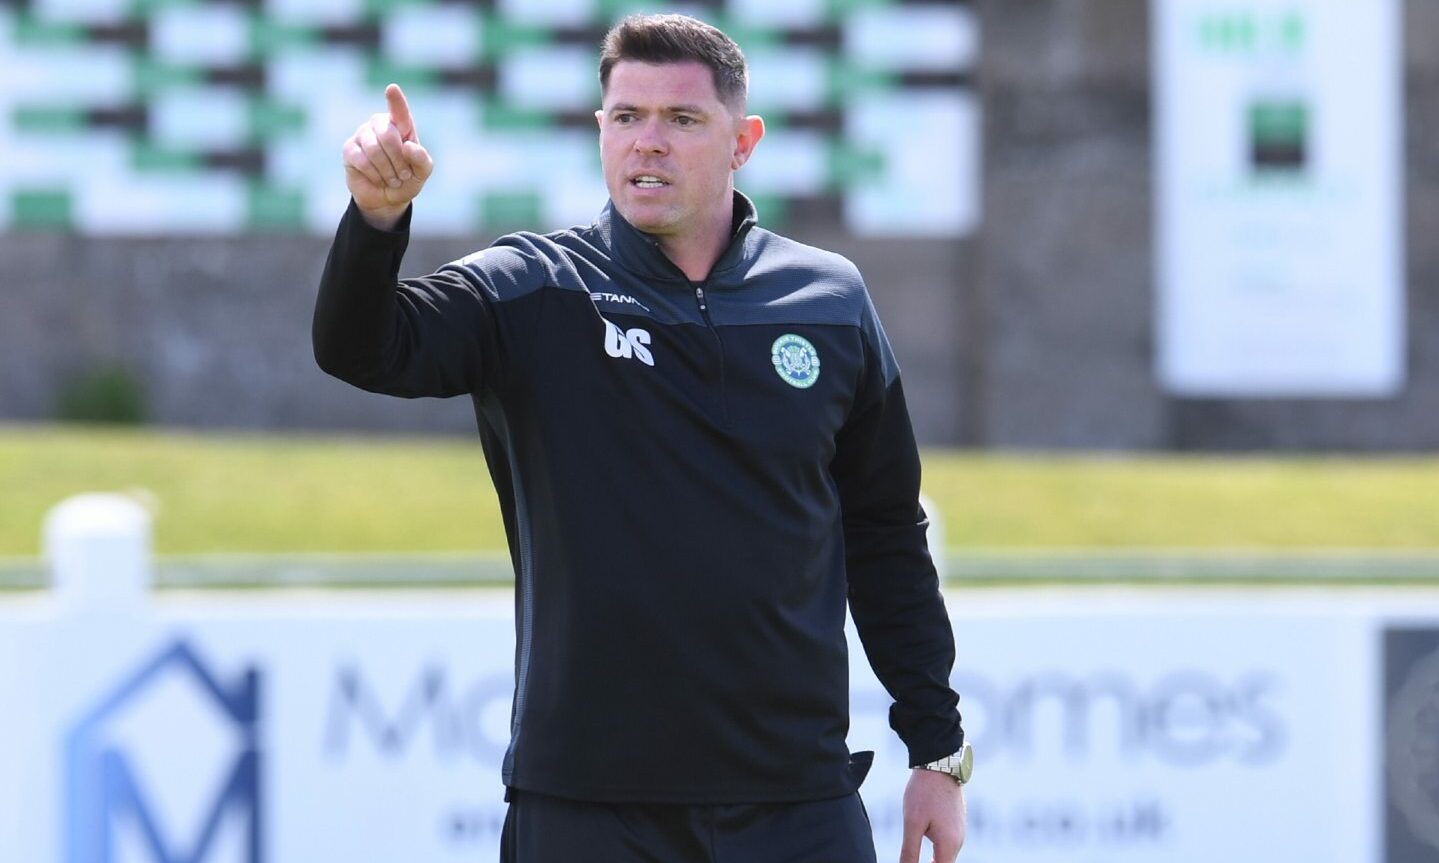 Buckie Thistle manager believes his side will continue to get better.